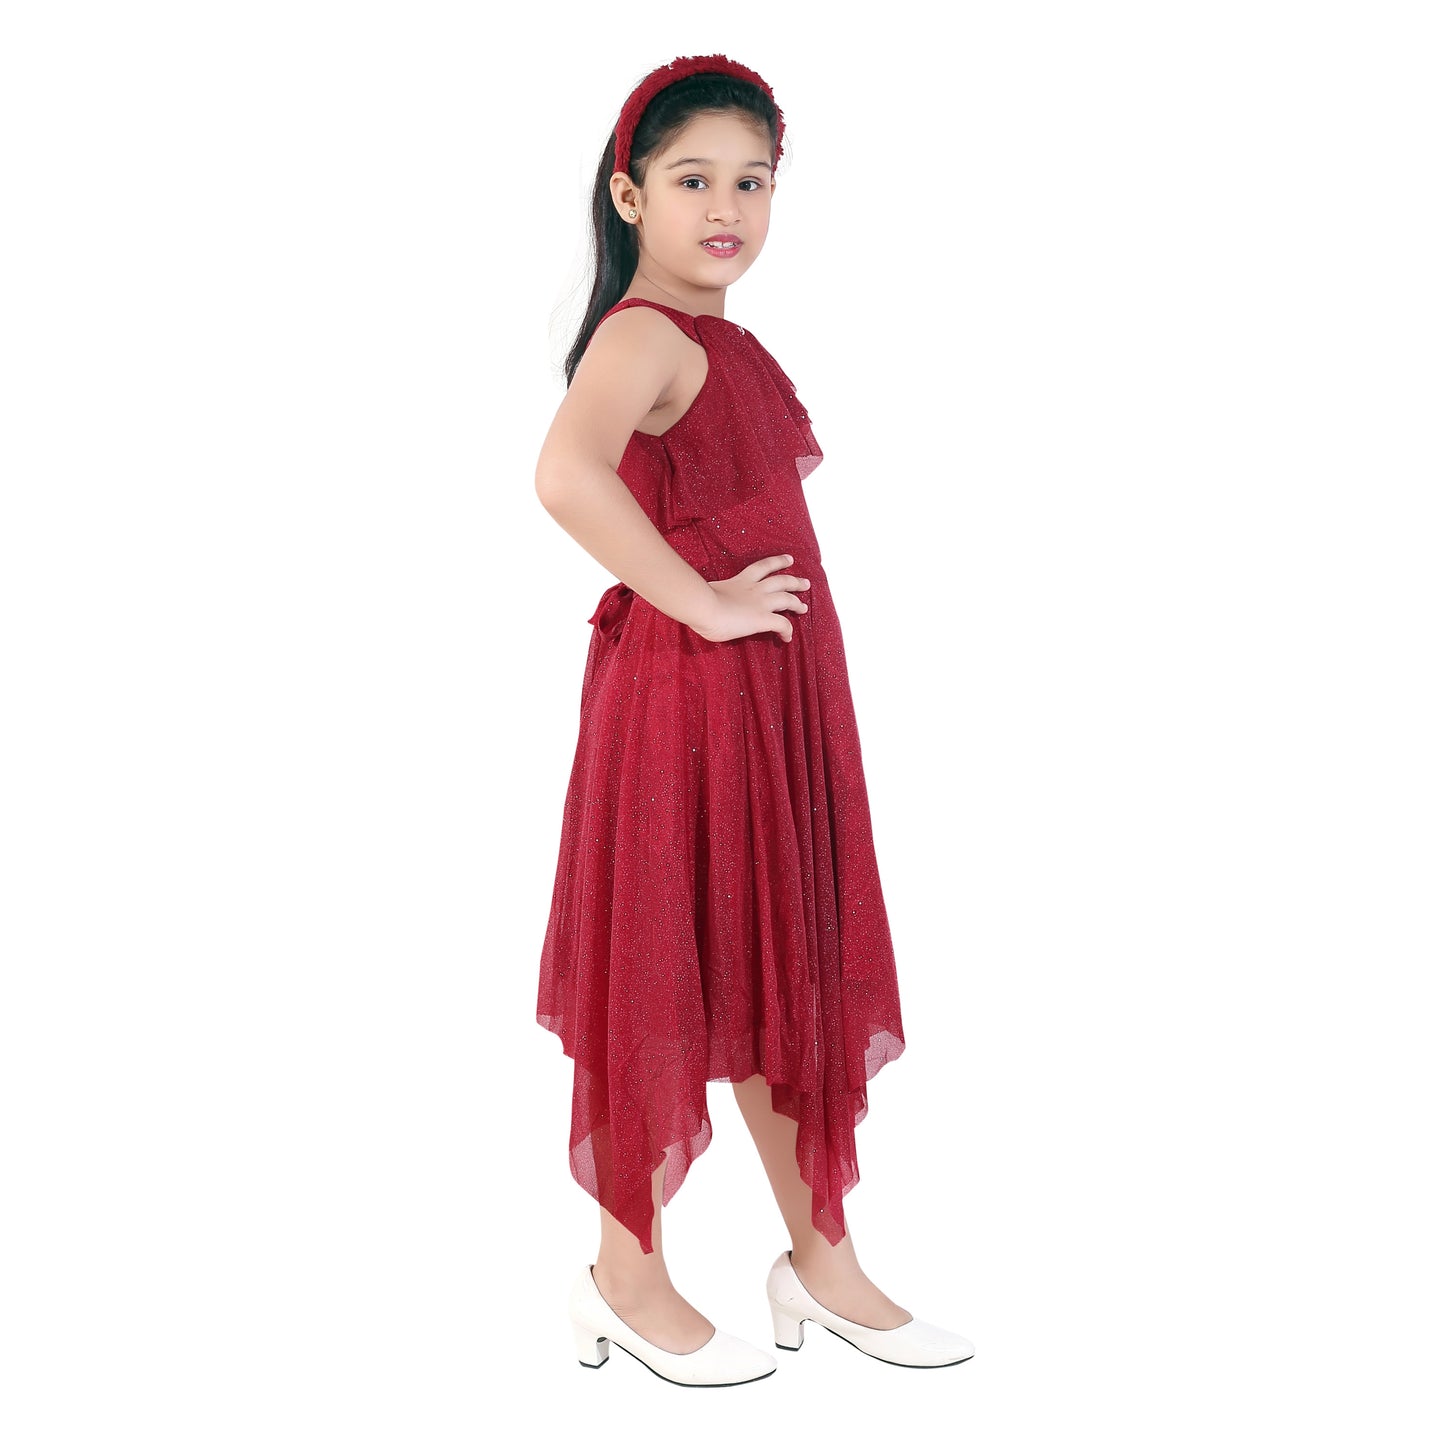 Shimmer Handkerchief Cut Middi With Pleats And Double Layering Body.